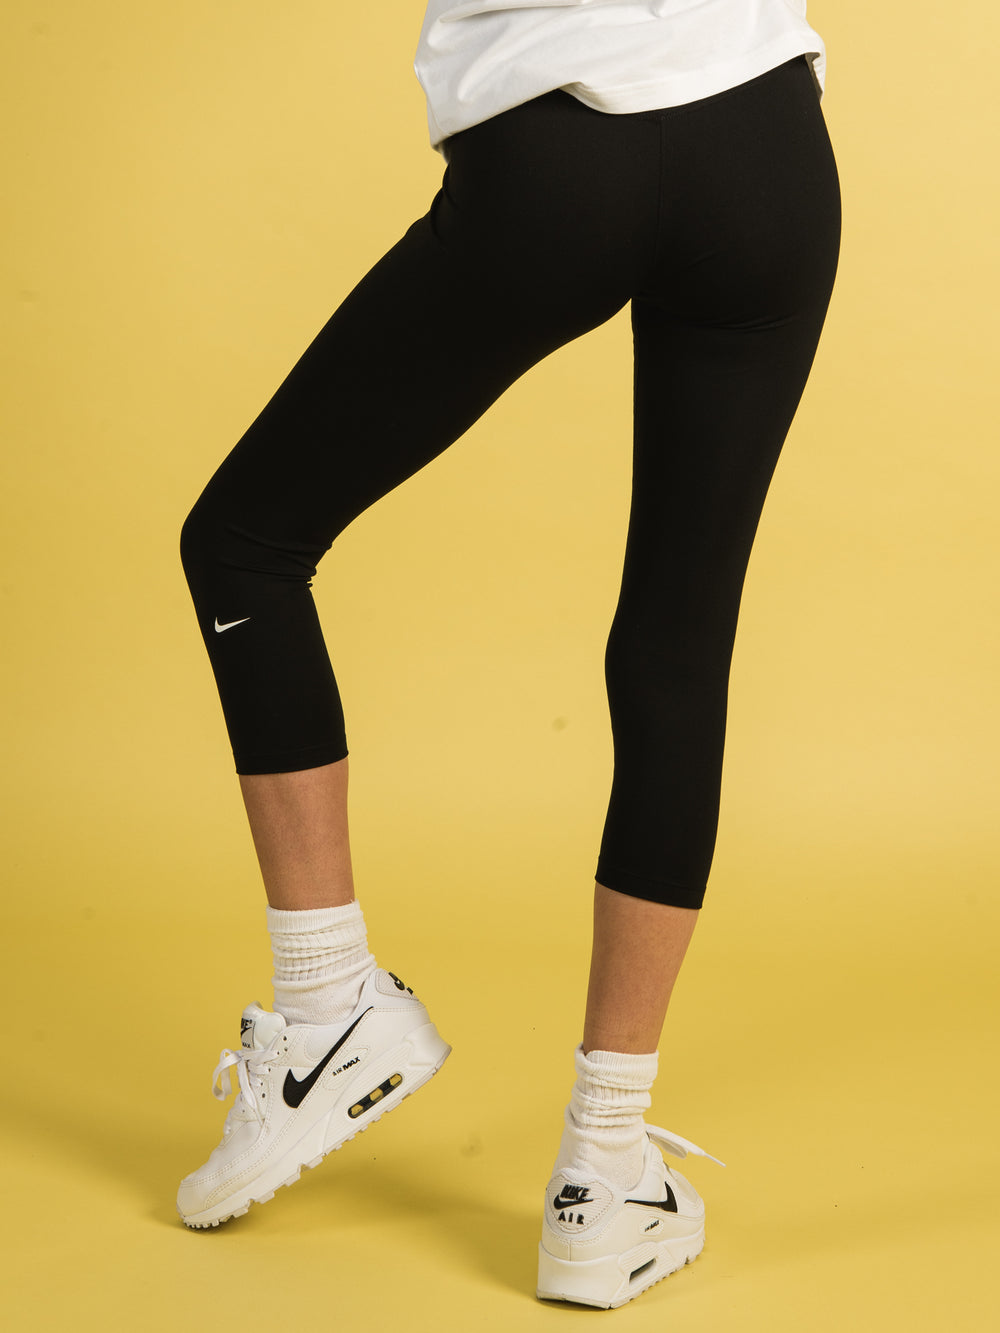 NEW Nike One Tight Fit Womens Black Crop Leggings Size Small